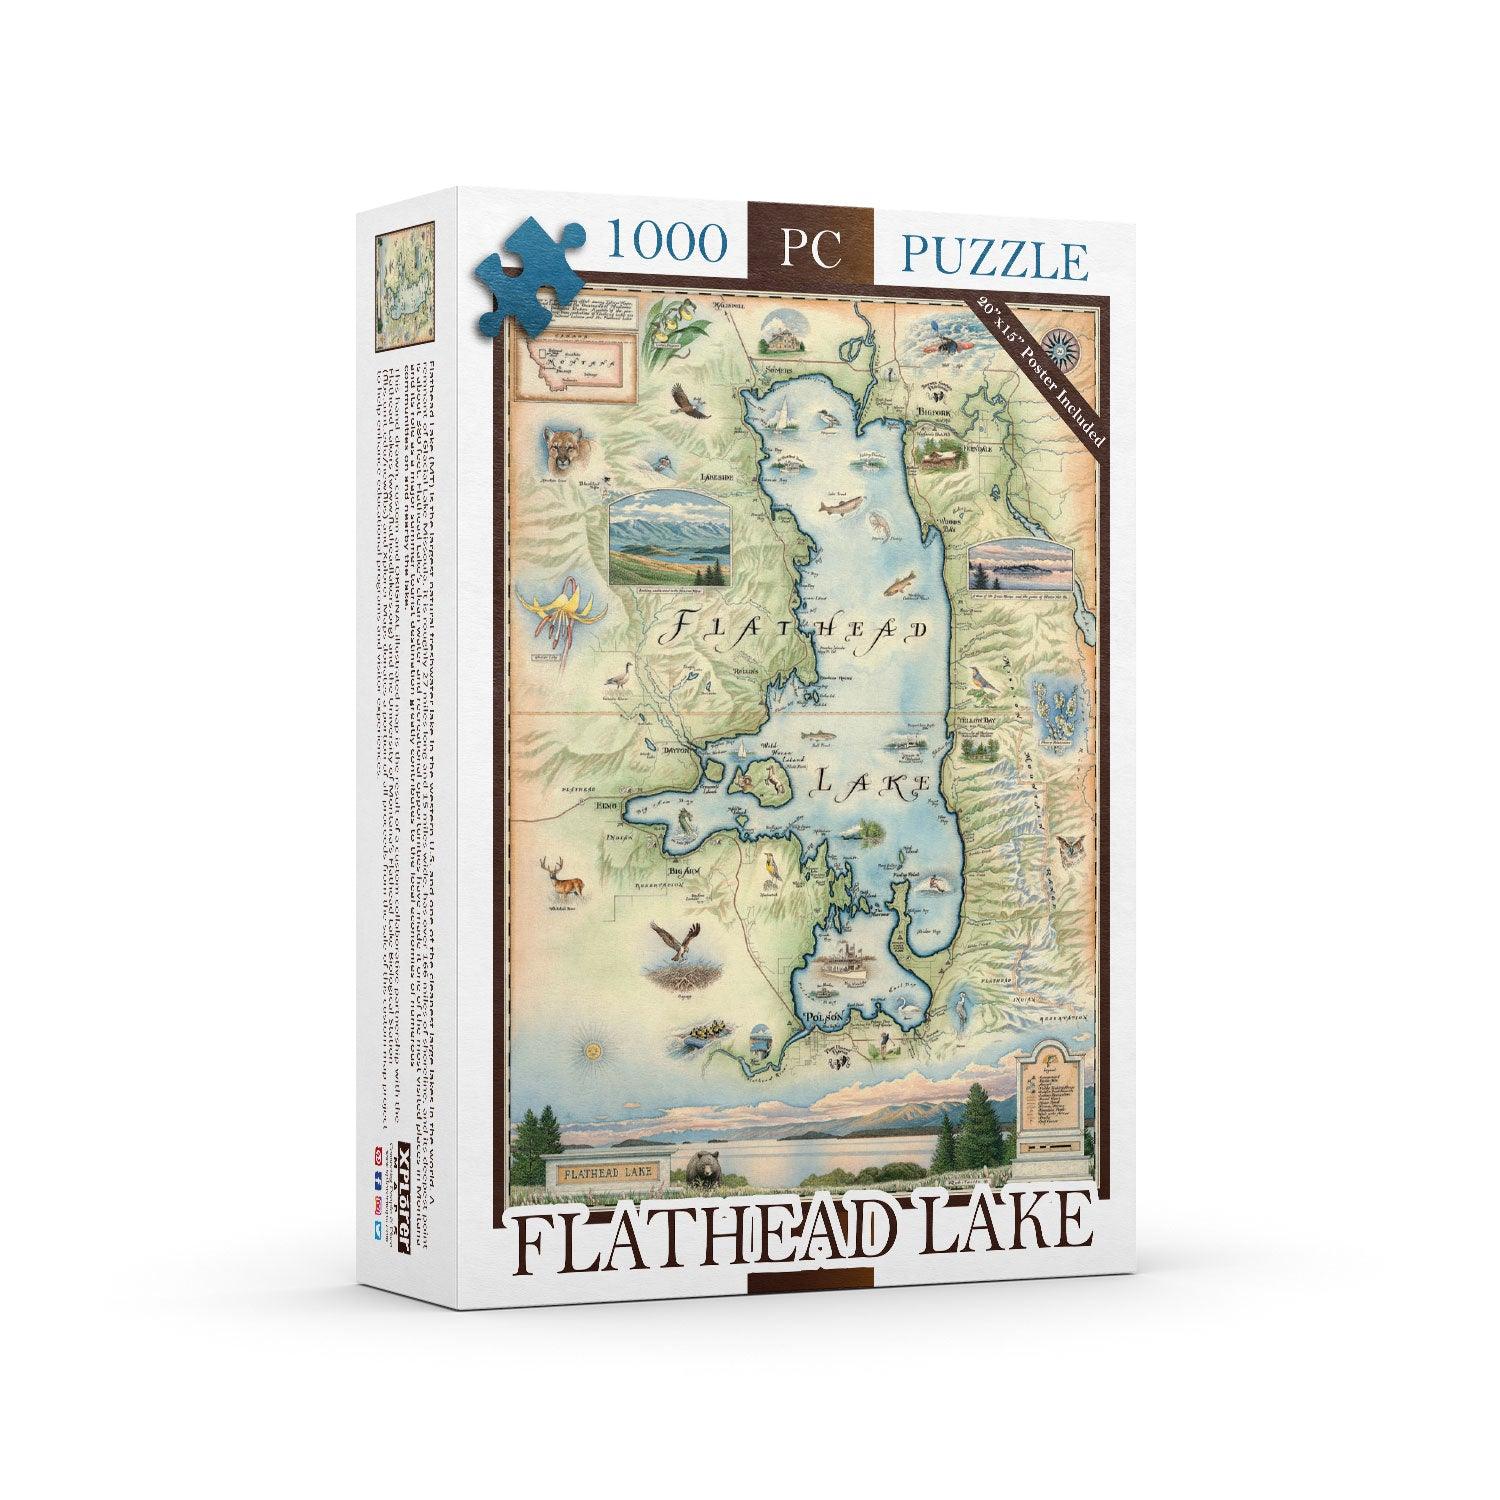 Montana's Flathead Lake map 1000-piece jigsaw puzzle. This Map features birds, eagles, Osprey, Bears, forest, water, deer, mountain lion, fish, and flowers.